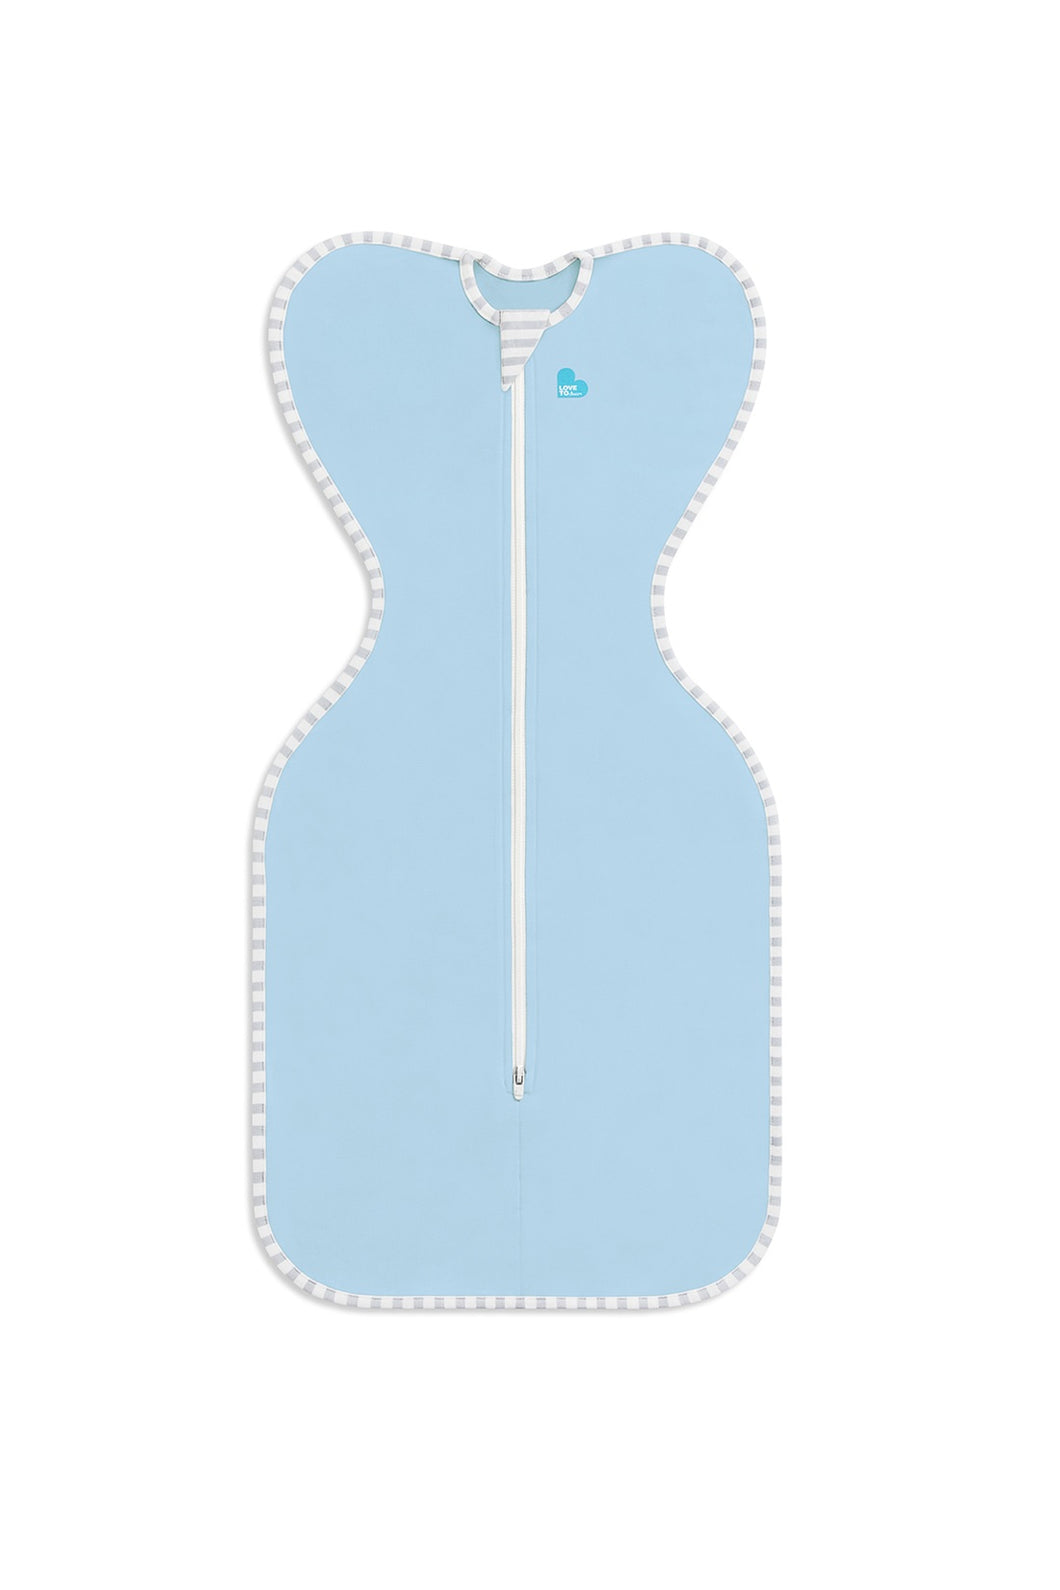 Love To Dream Swaddle Up Lite Light Blue 1